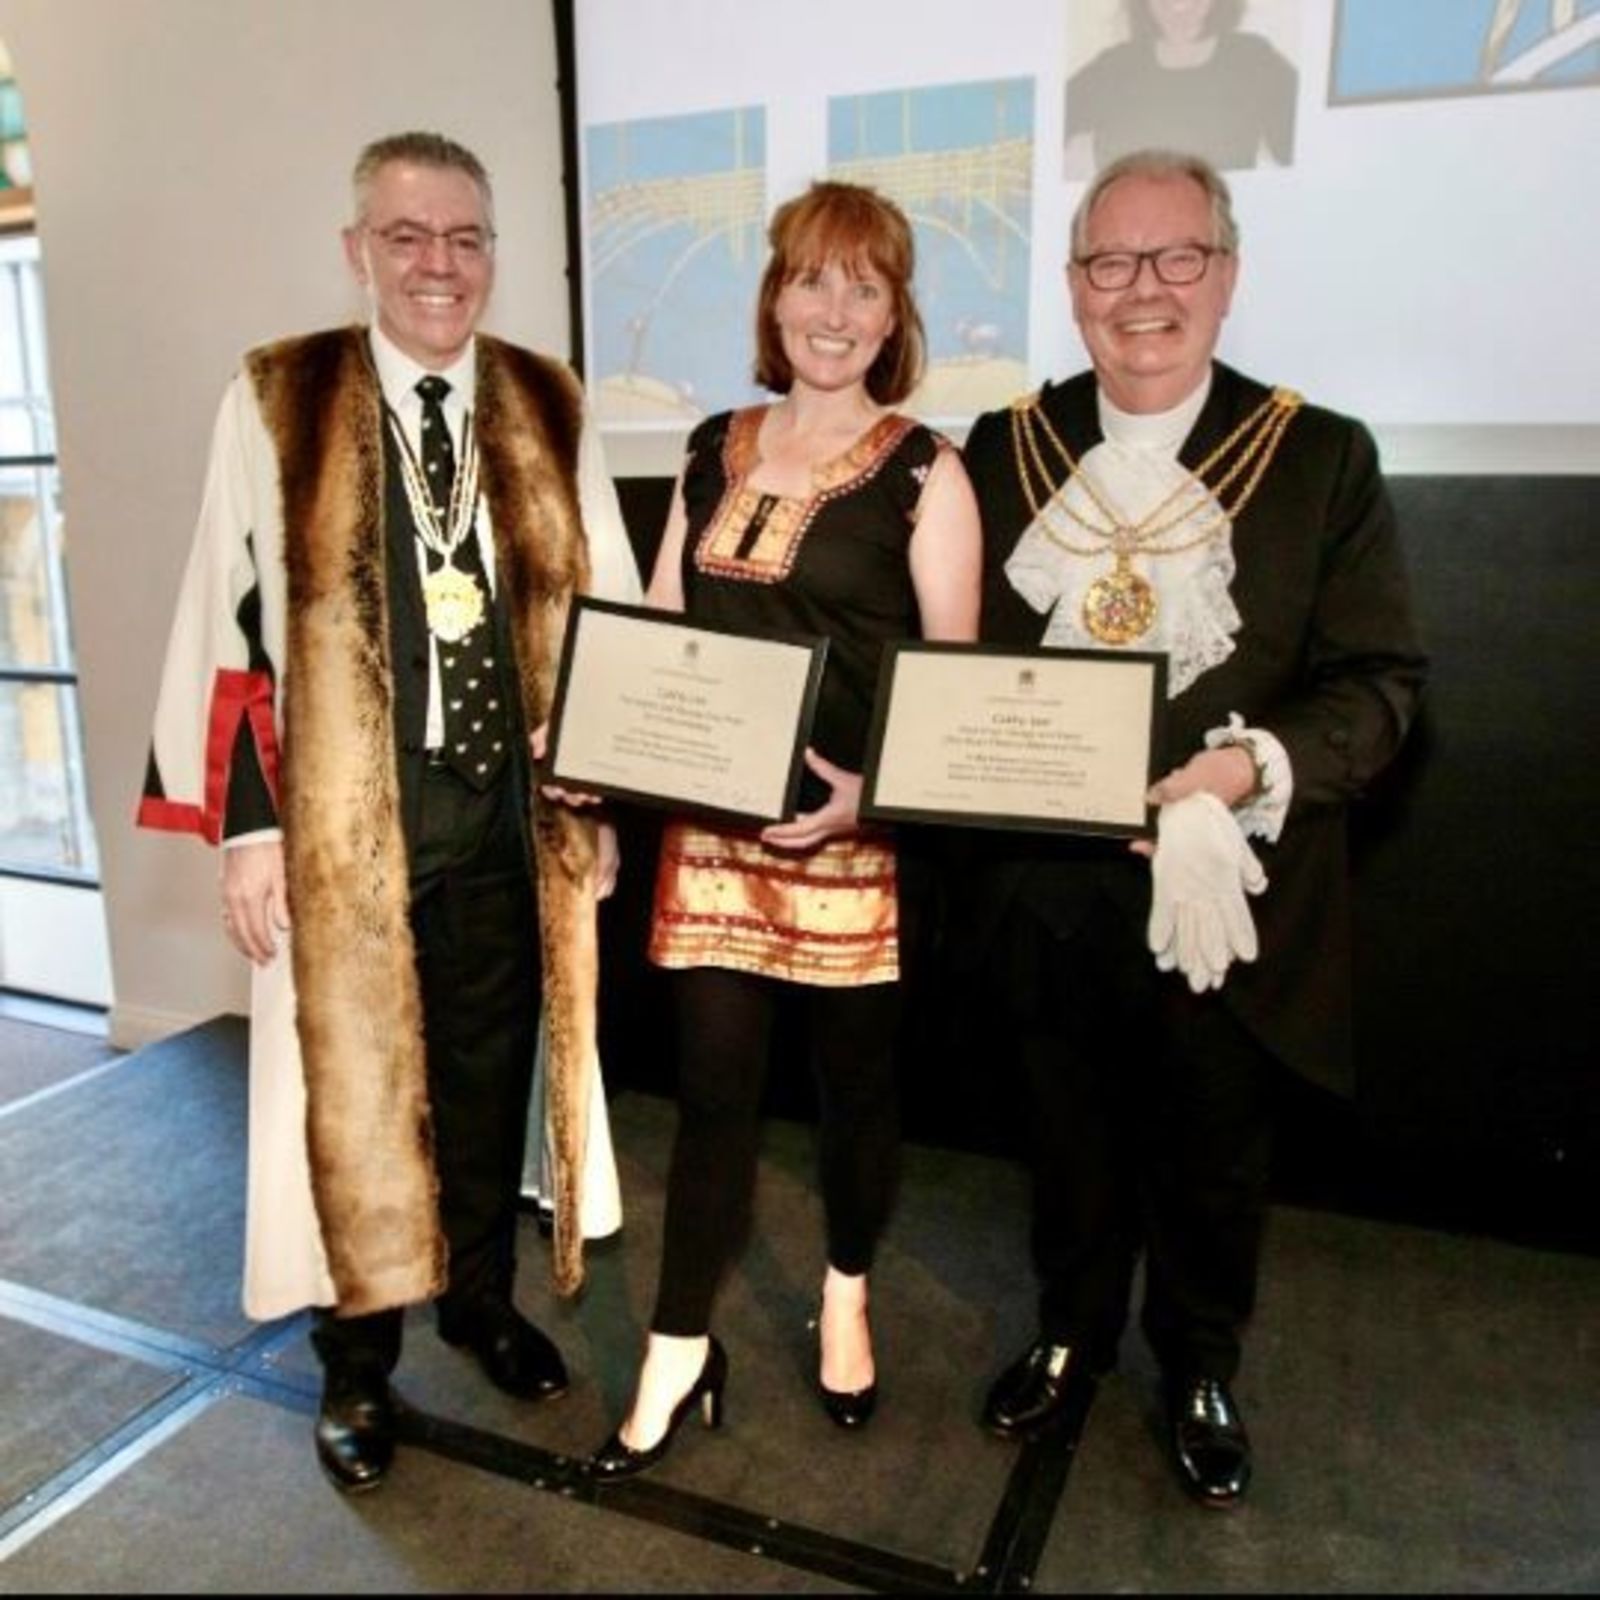 19 June 2023 - As a member of the Glaziers myself, I was delighted to present the awards for some astonishing work at the Annual Stevens Competition.